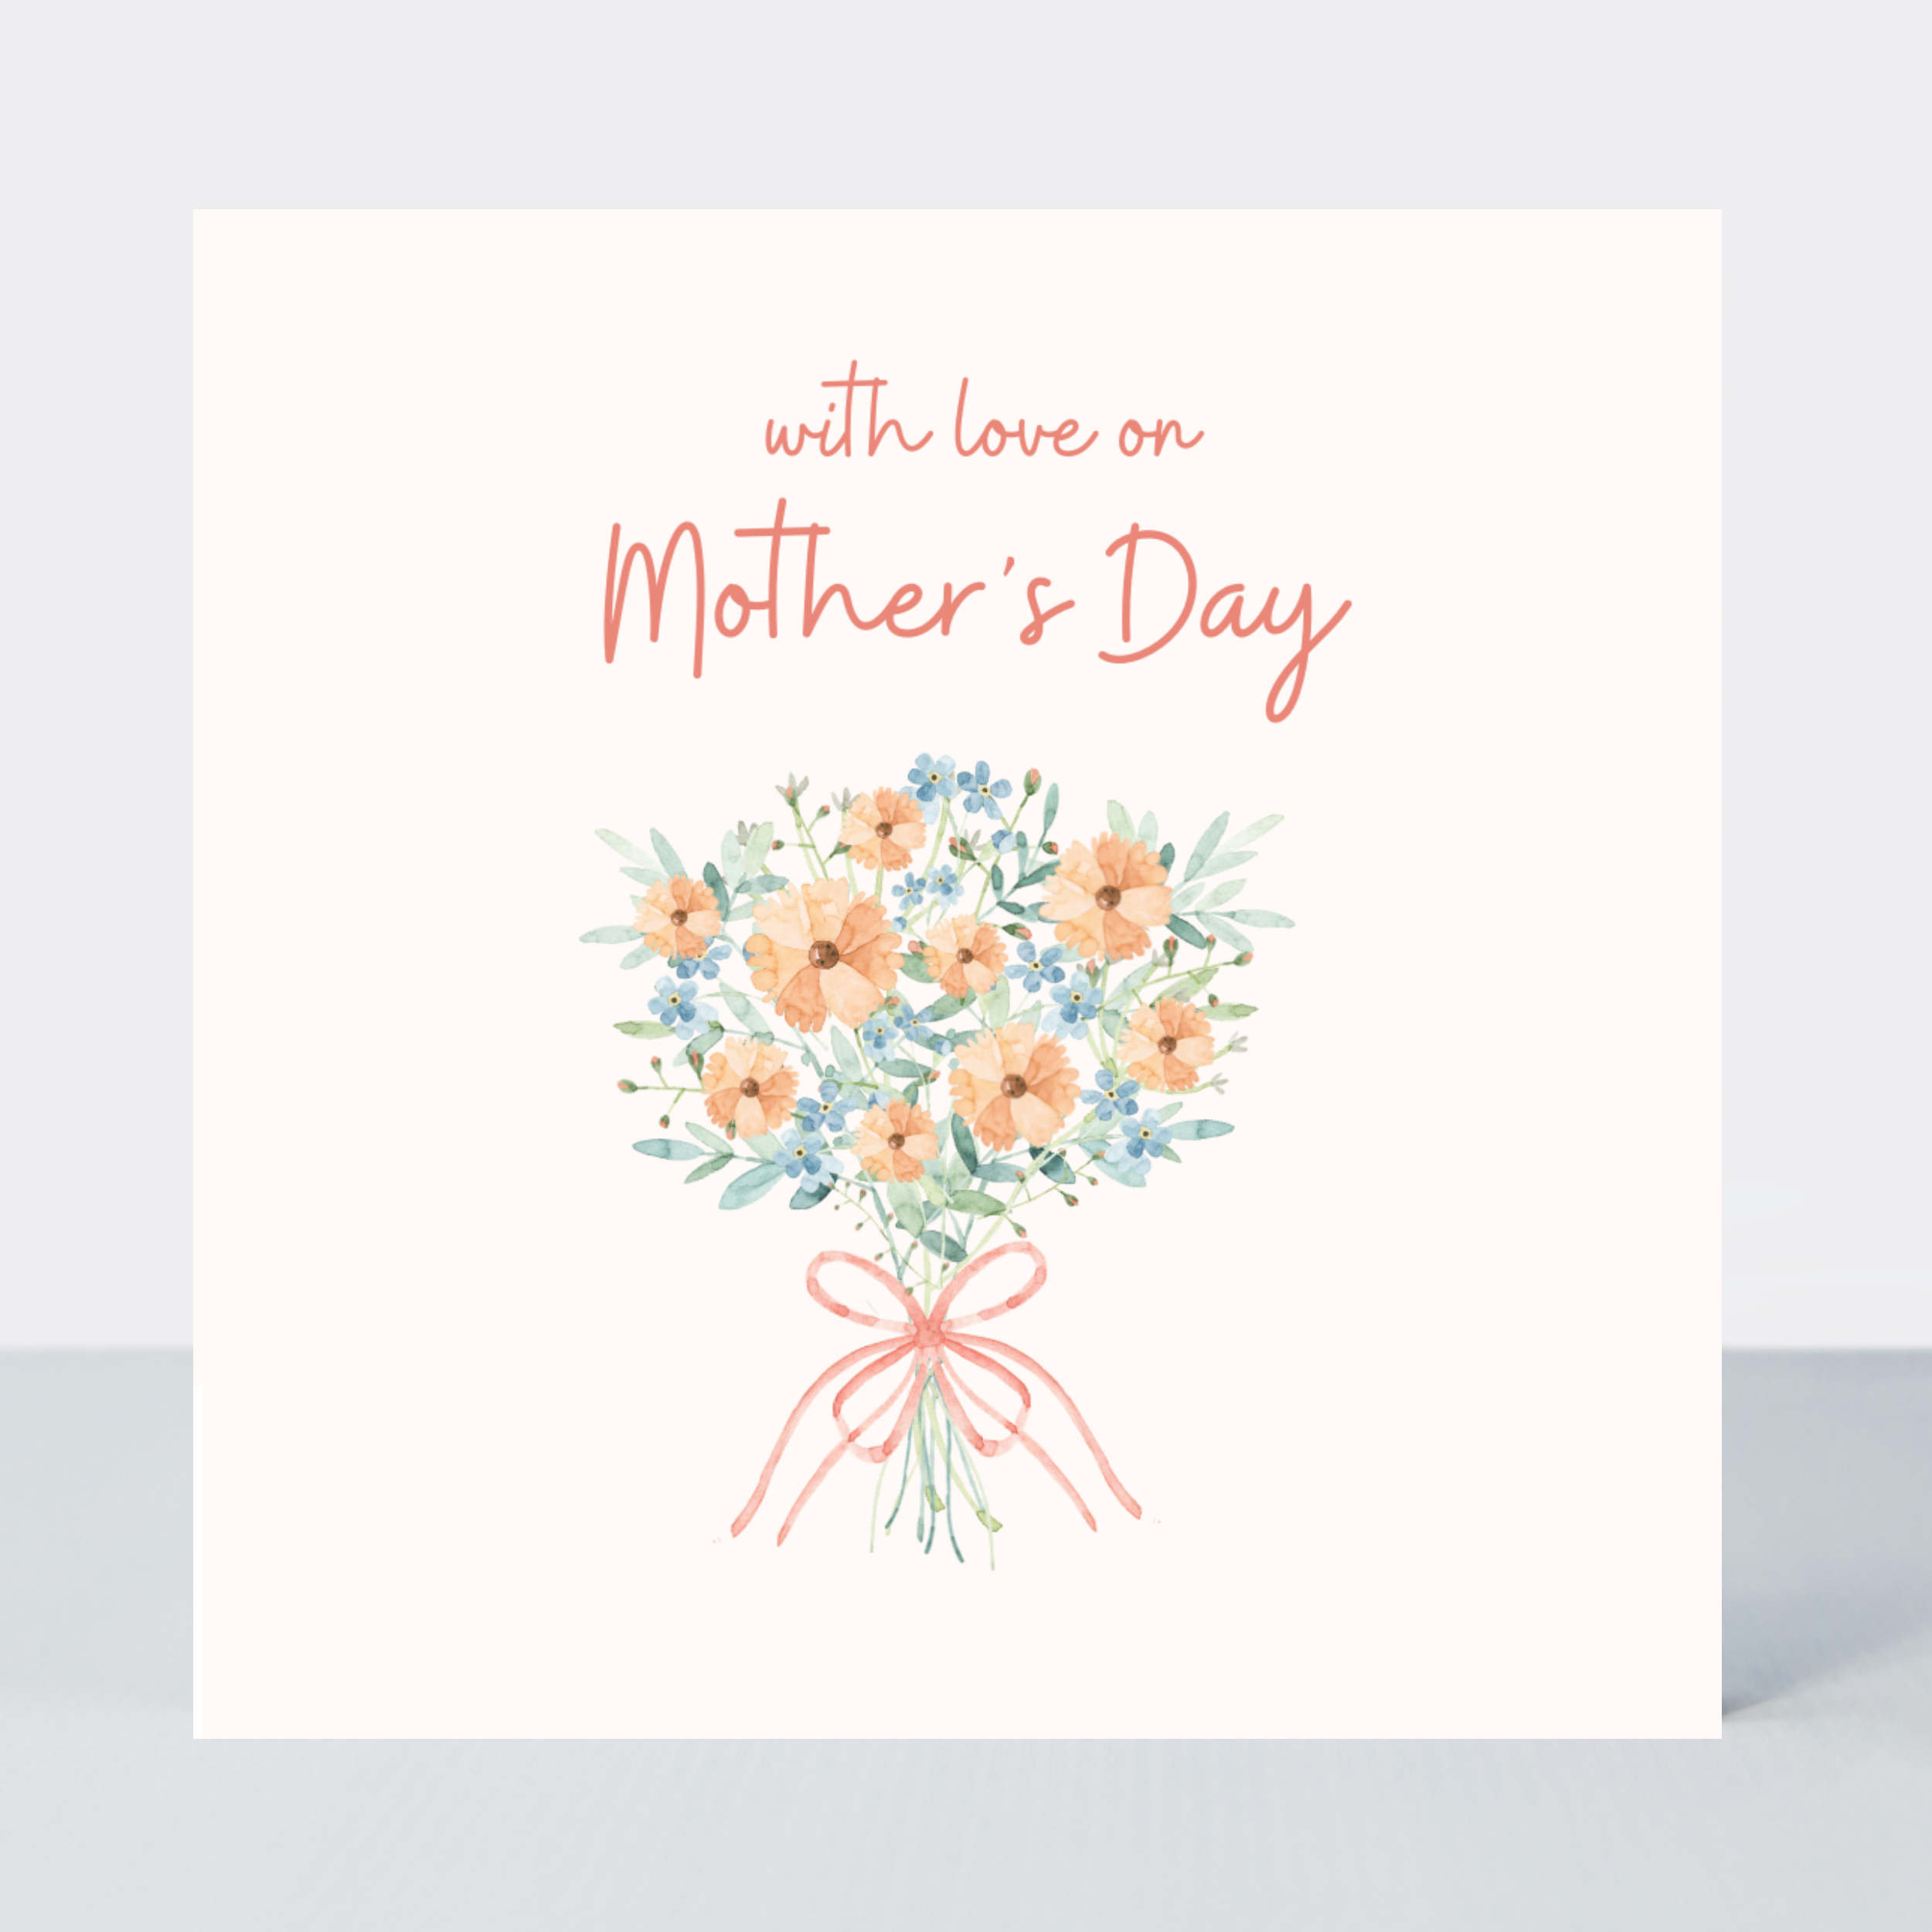 In Clover With Love On Mother's Day Card